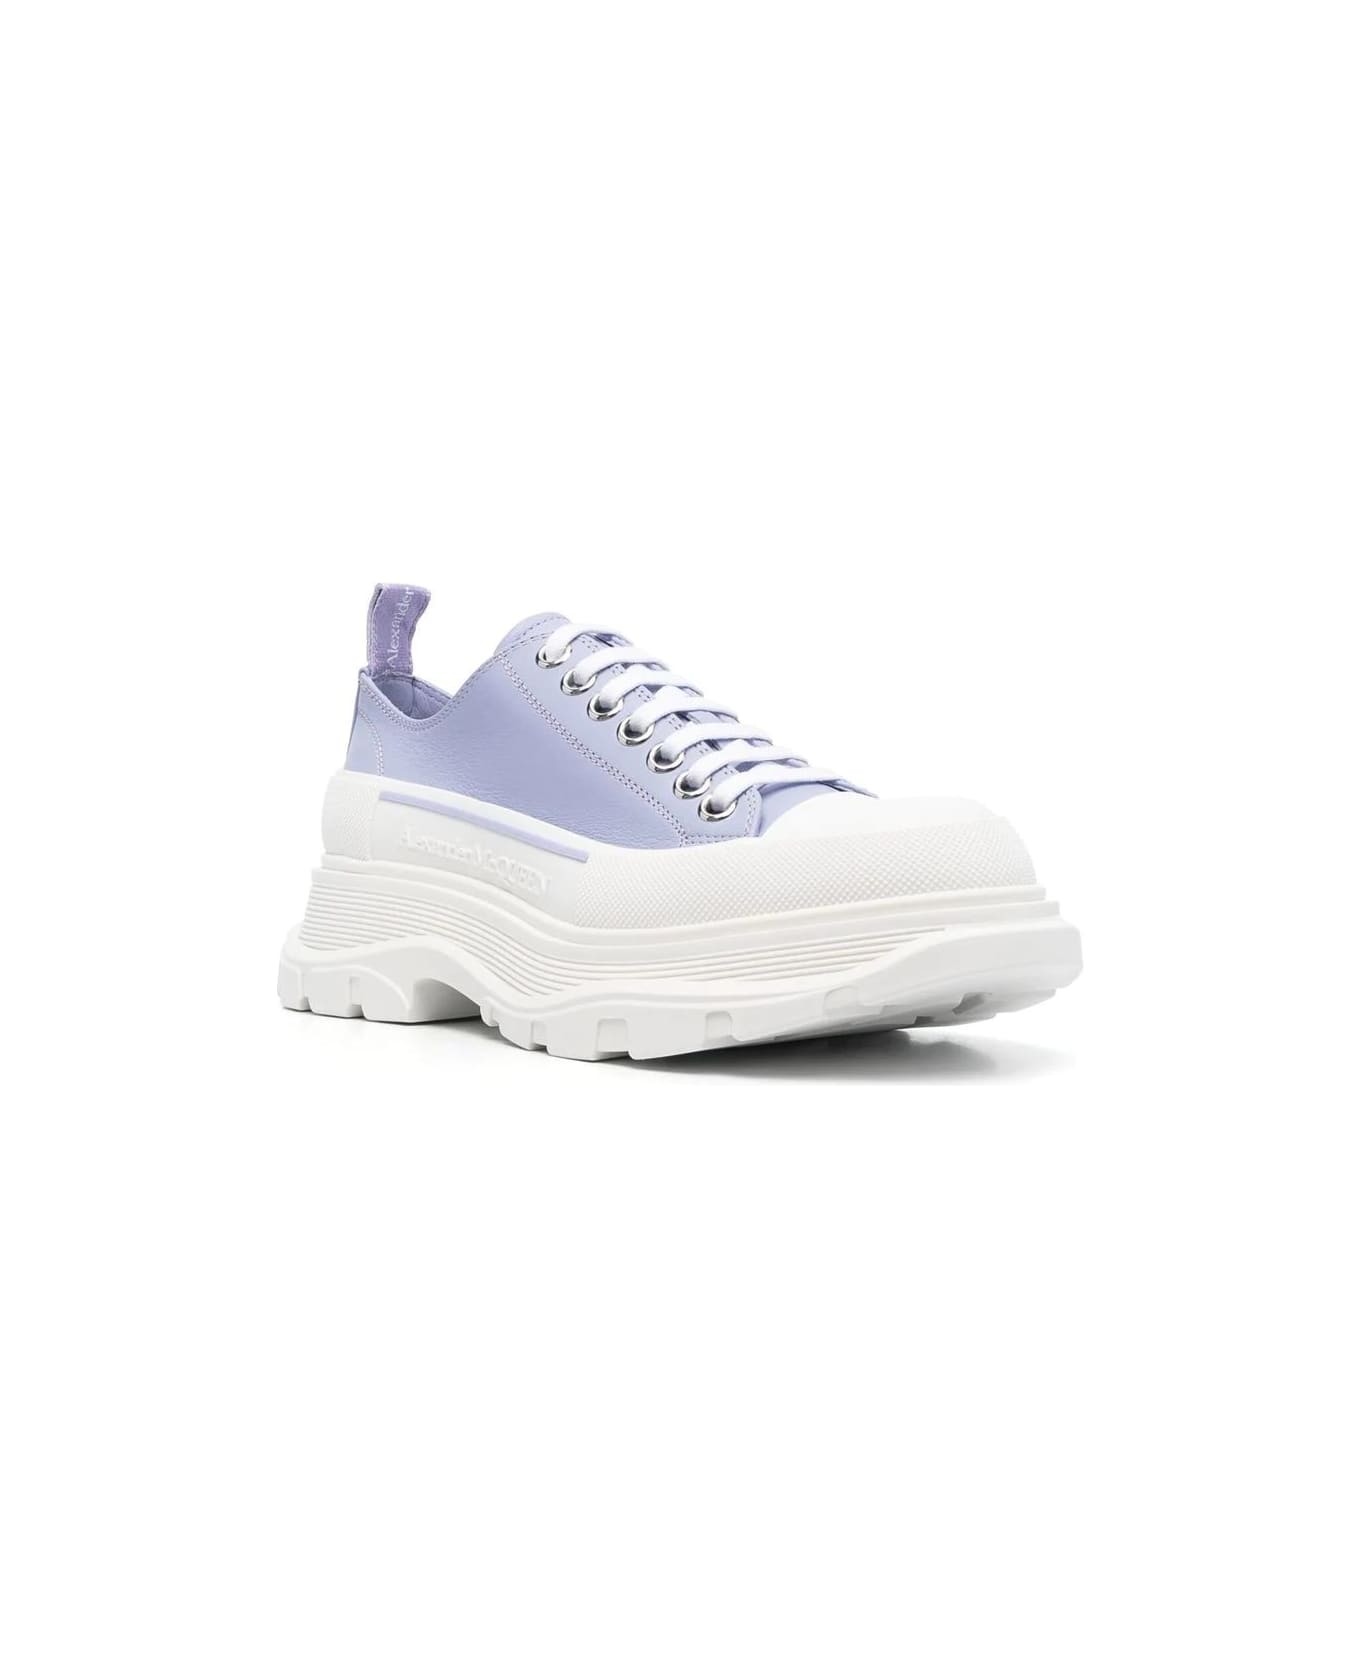 Alexander McQueen Lilac And White Tread Slick Laced Shoes - Viola